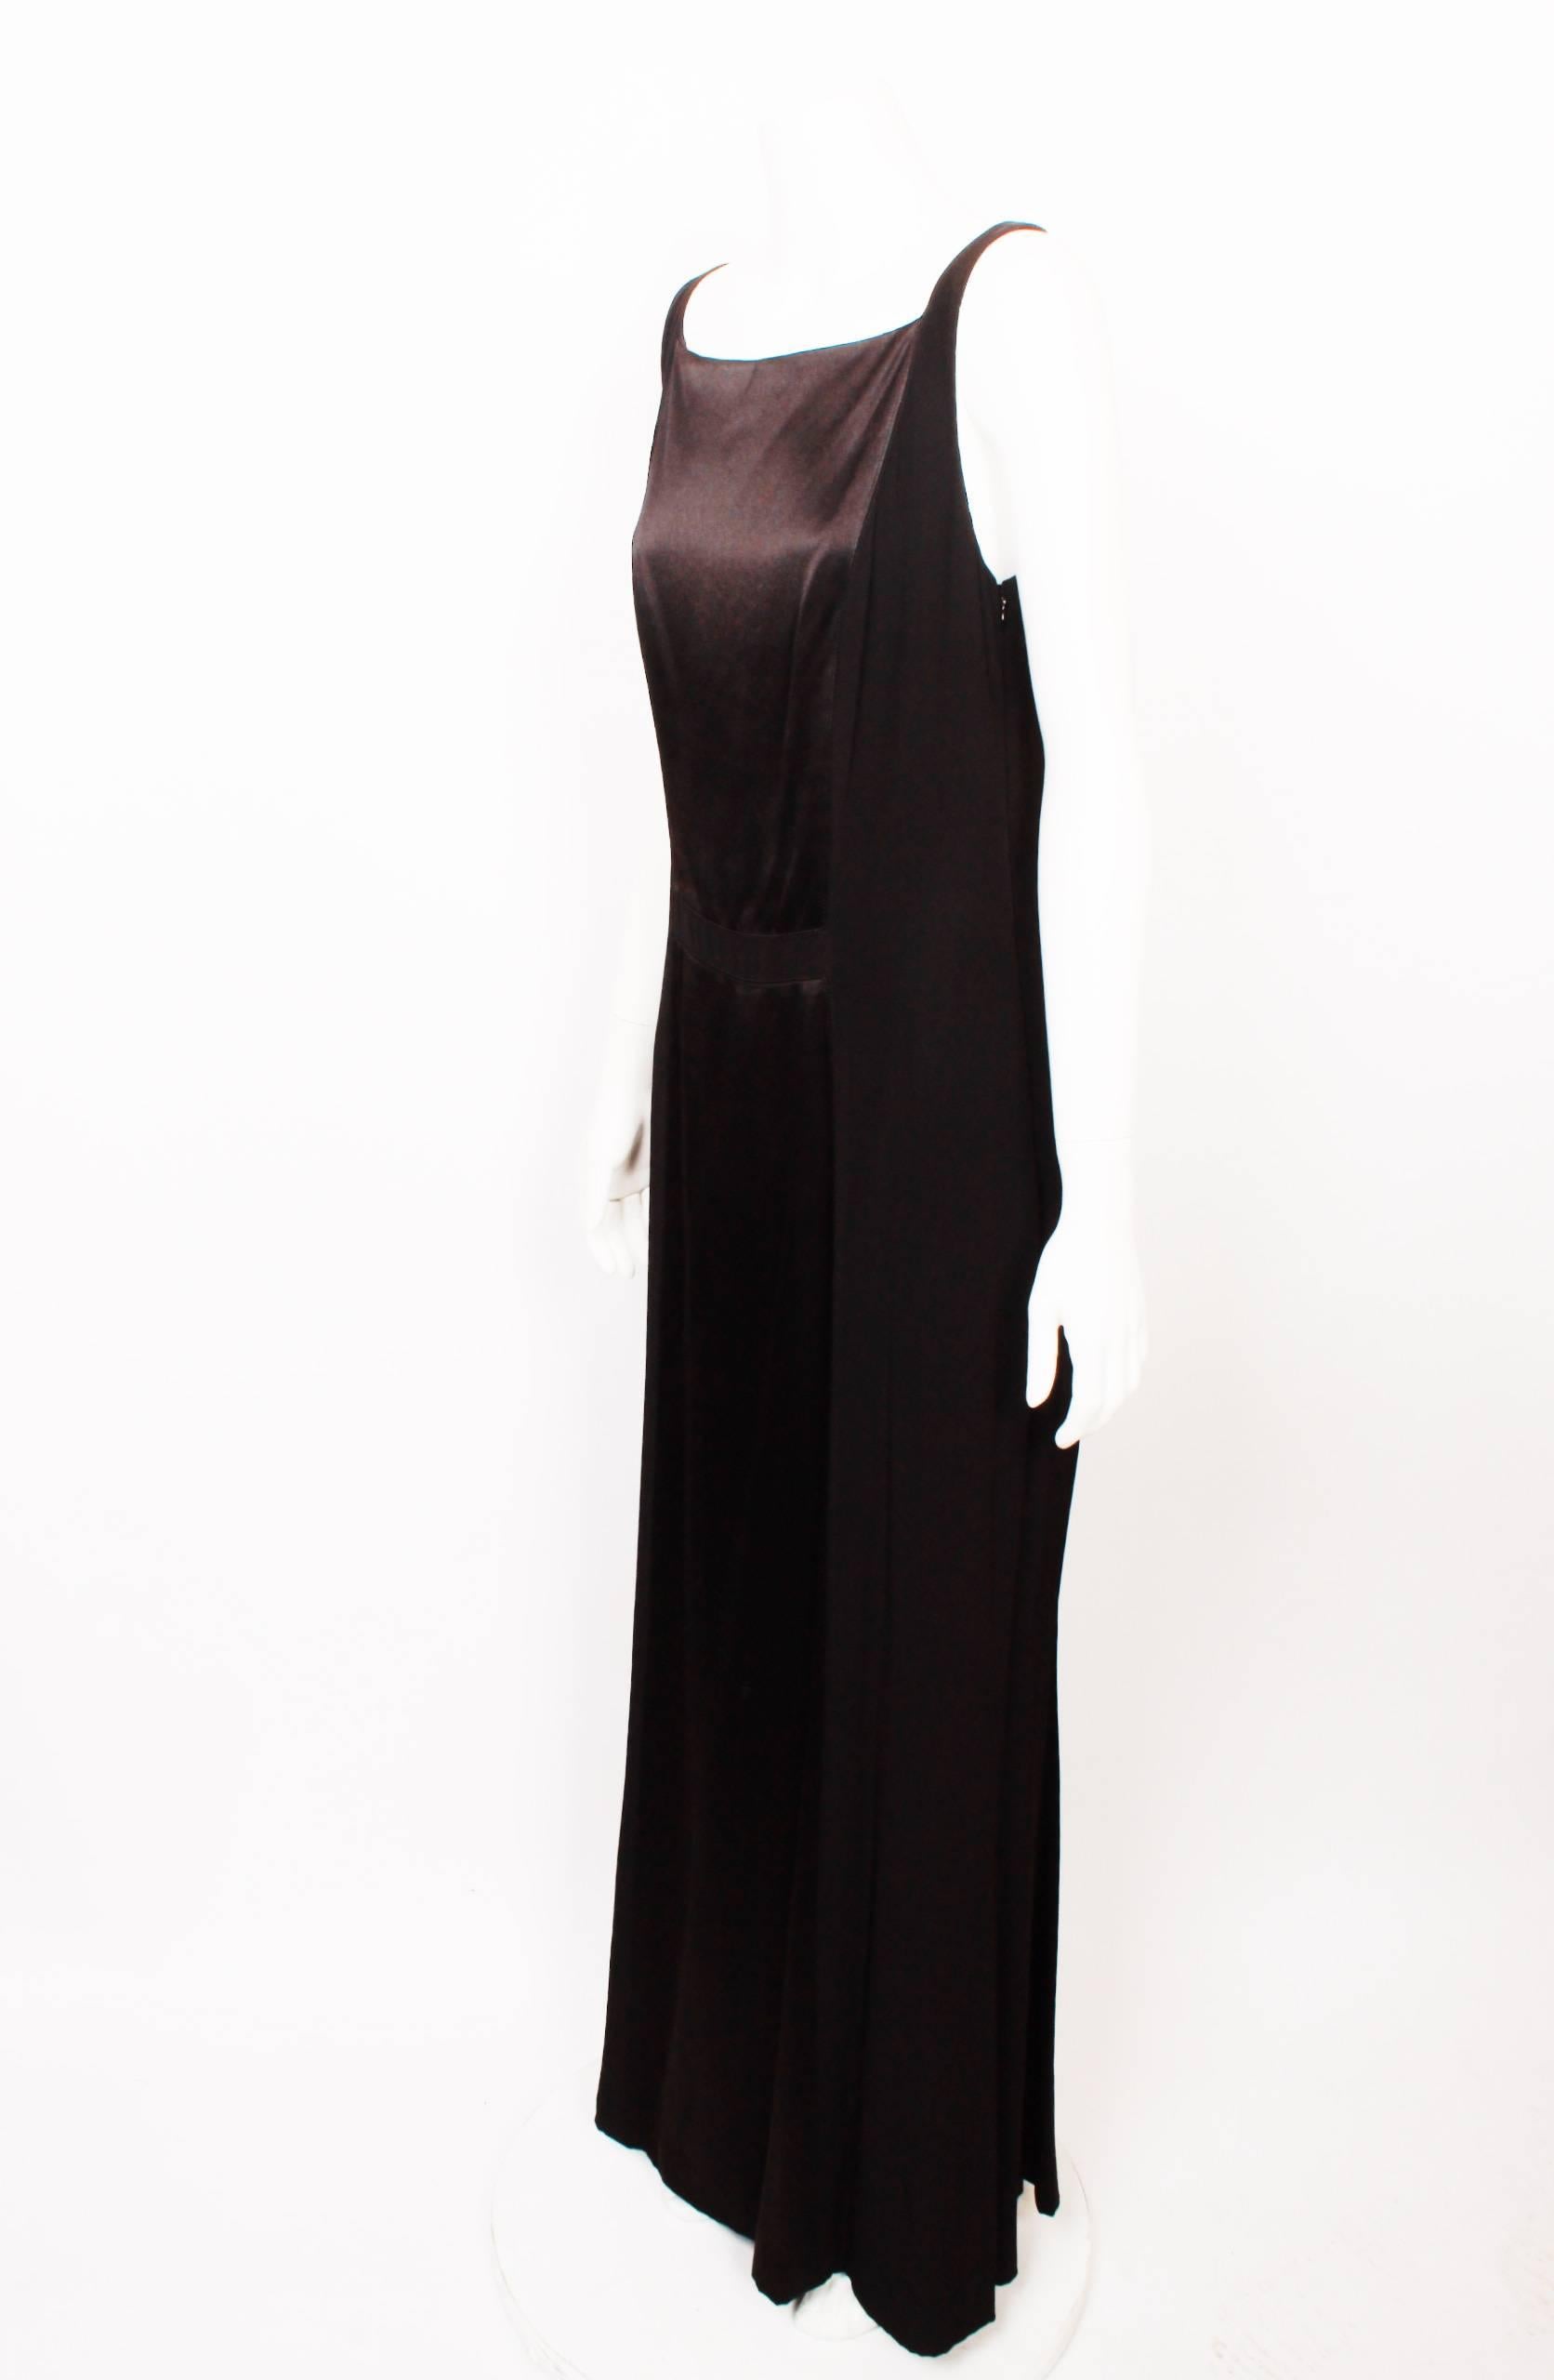 FINAL SALE

Elegant Vera Wang sleeveless, full length black silk sheath dress with square front neckline. The dress is mainly Matte crepe with a centre front panel insert of  luxurious satin and lovely horizontal satin strip across the front waist.